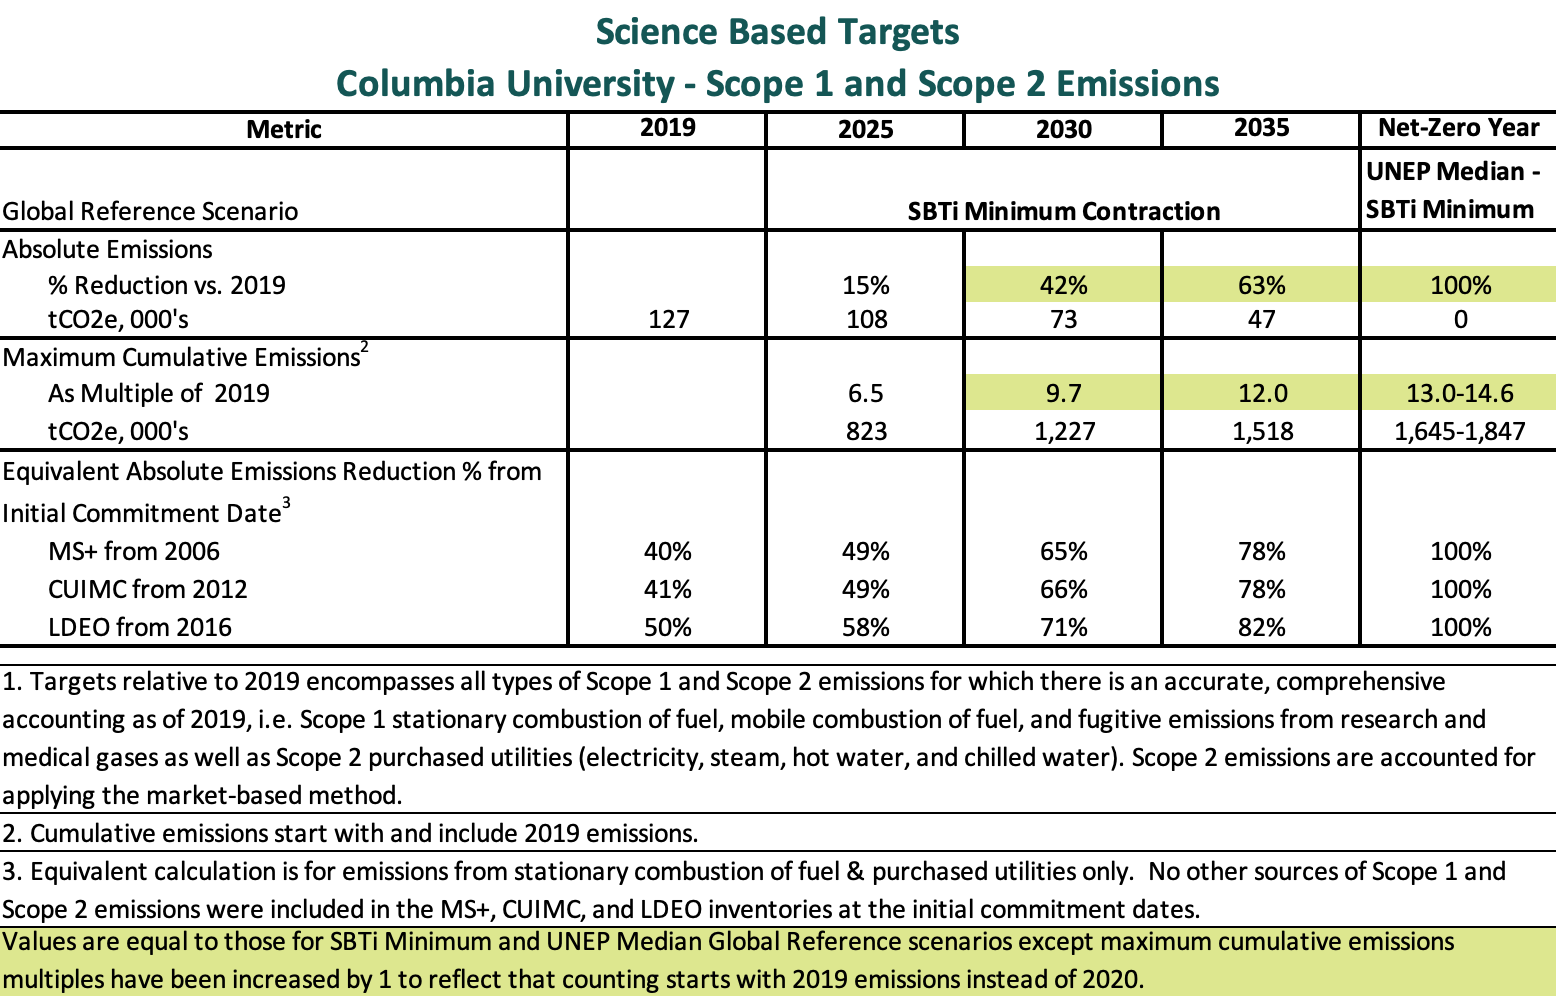 Table Description: Science-Based Targets, Interim Targets for Columbia University Scope 1 and 2 Emissions; The University commits to reducing absolute GHG emissions 49% by 2025; 65% by 2030; 78% by 2035; and 100% by 2050 or sooner.